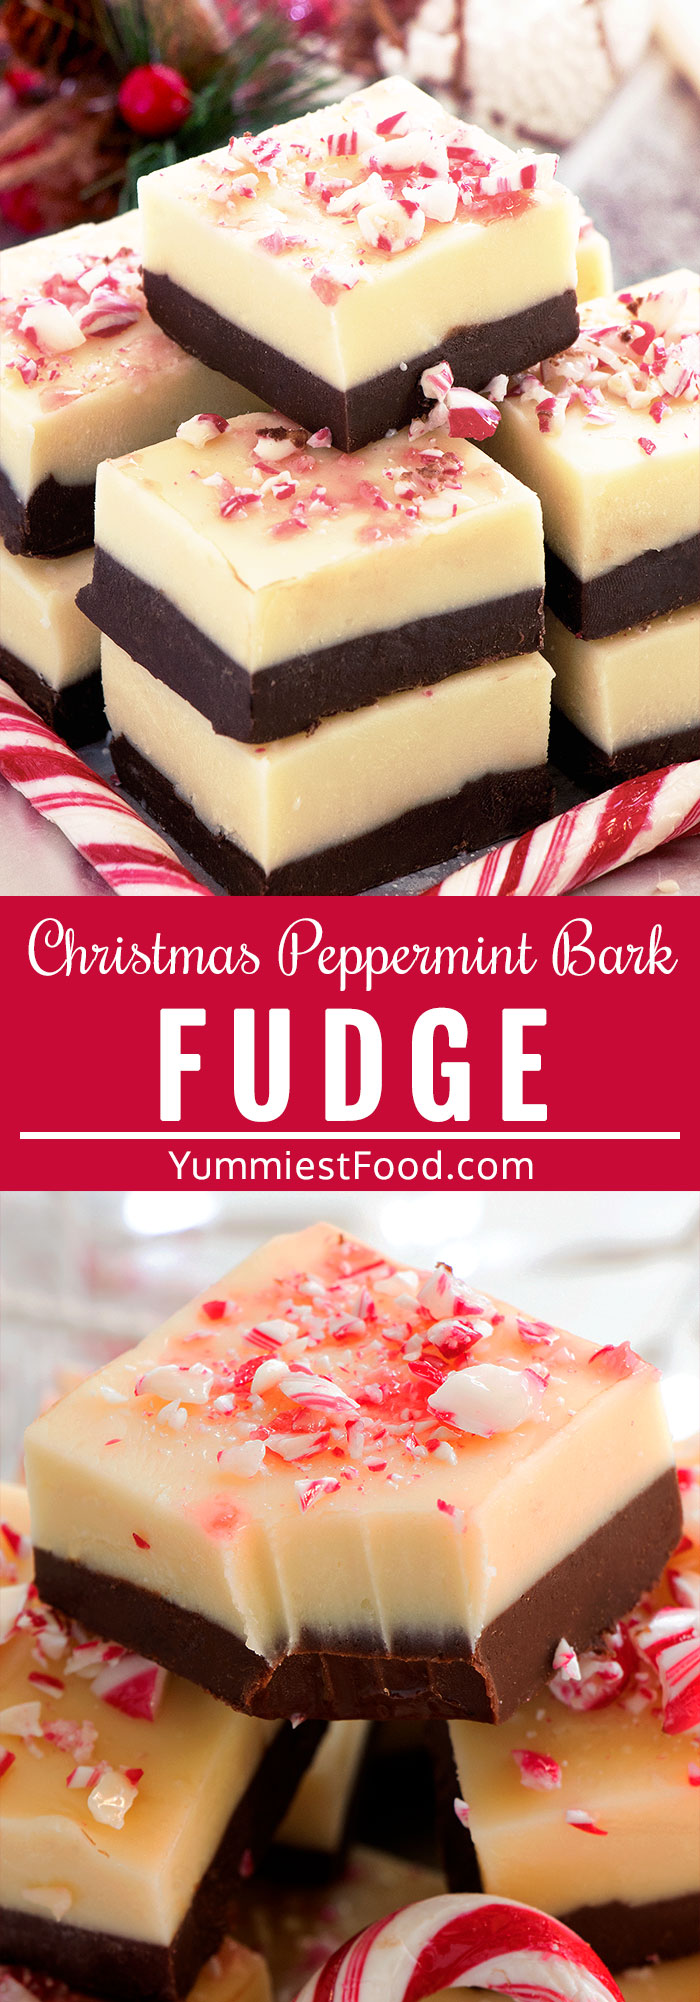 Christmas Peppermint Bark Fudge - For the real taste of Christmas try Peppermint Bark Fudge - "After Eight" and candy canes flavored, dark and white chocolate layered, no-bake adorable fudge! So easy and fast to make, 6 ingredients only! #christmas #christmasrecipes #desserts #dessert #dessertrecipes #dessertfoodrecipes #easyrecipes #ChristmasFudge #peppermint #FudgeRecipe #fudge #peppermintfudge